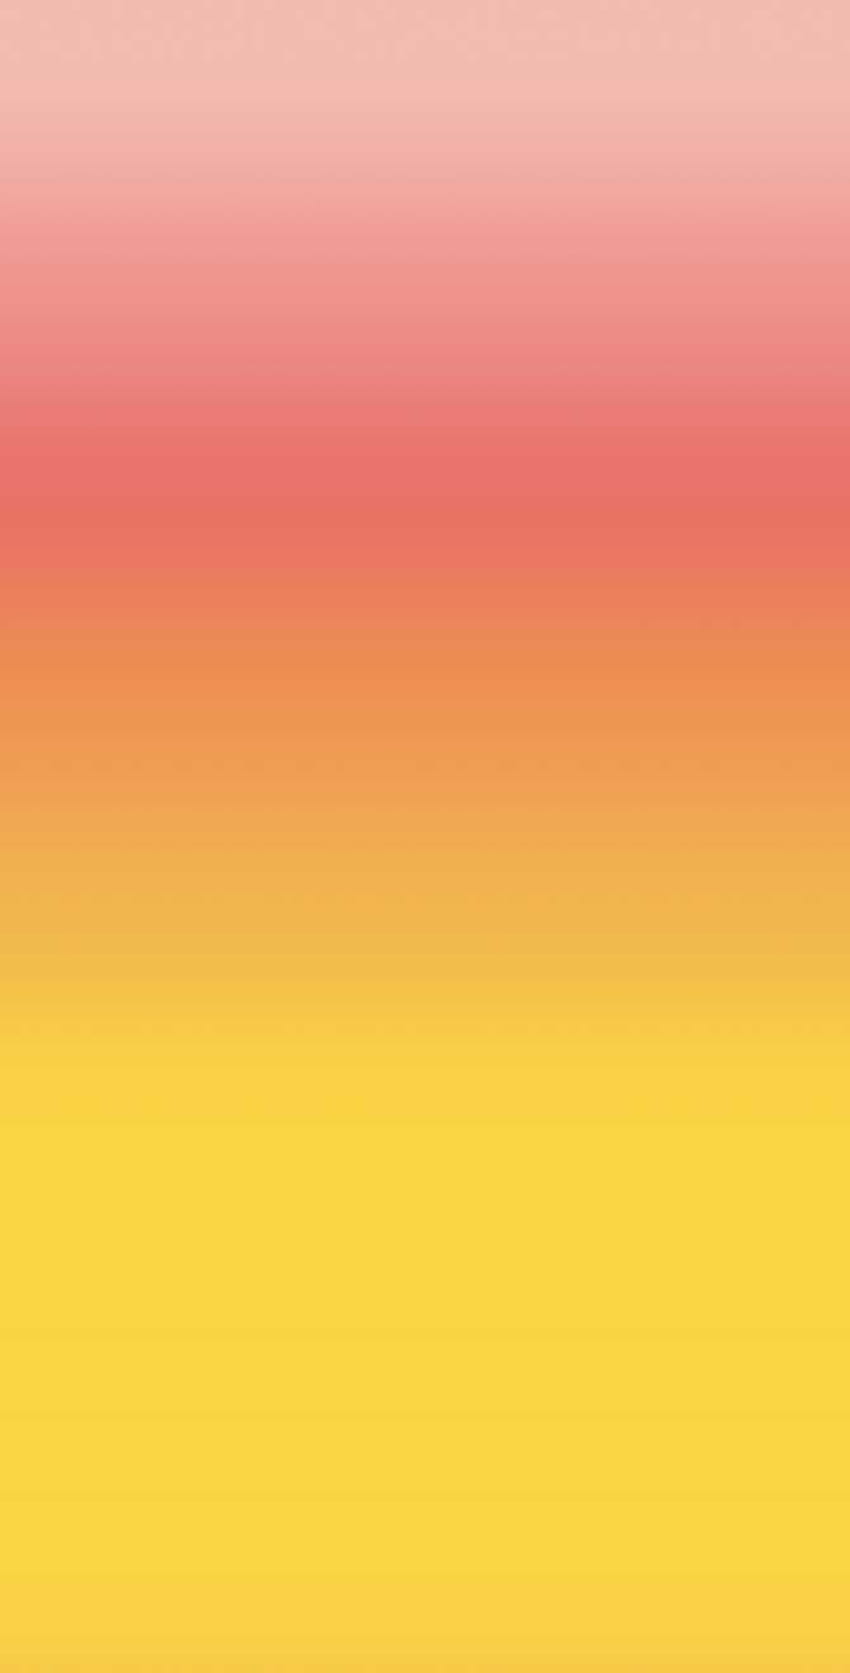 Ombre Pink Yellow Gradient Backdrop, orange and yellow gradient HD ...